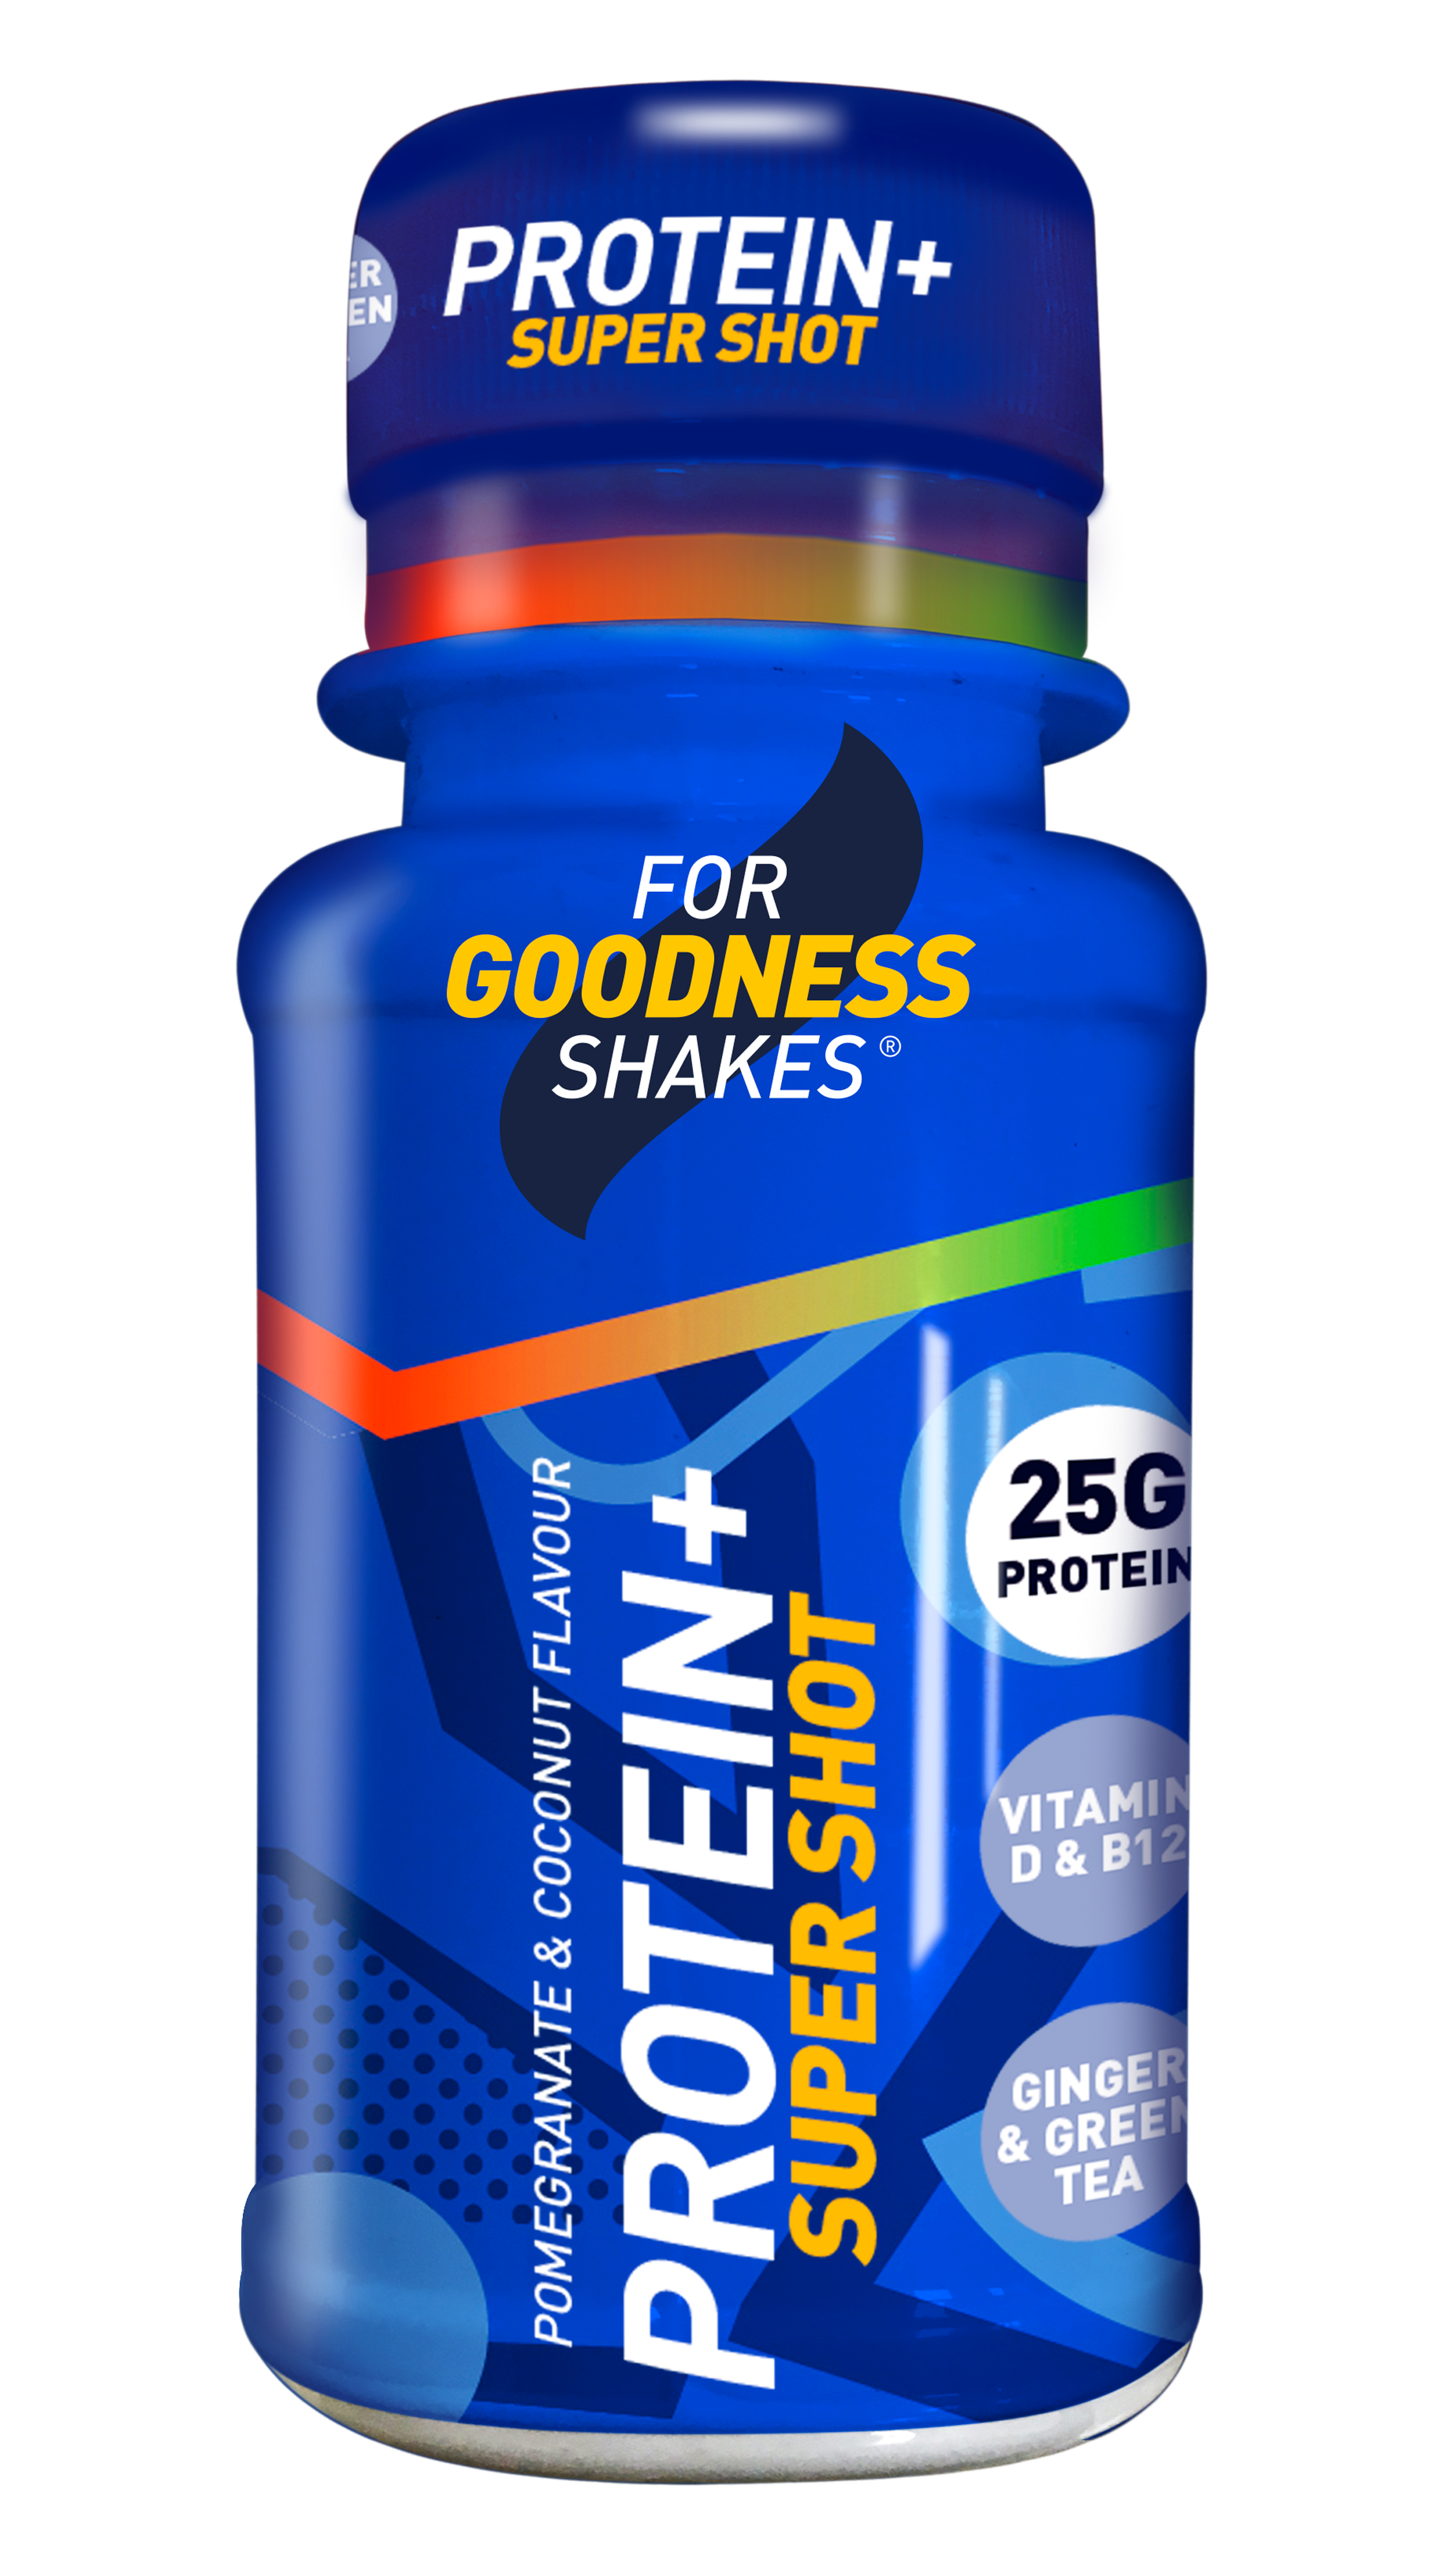 For Goodness Shakes Protein+ Super Shot - Pomegranate and Coconut Flavour. The perfect on-the-go supplement to hit your health and fitness goals.